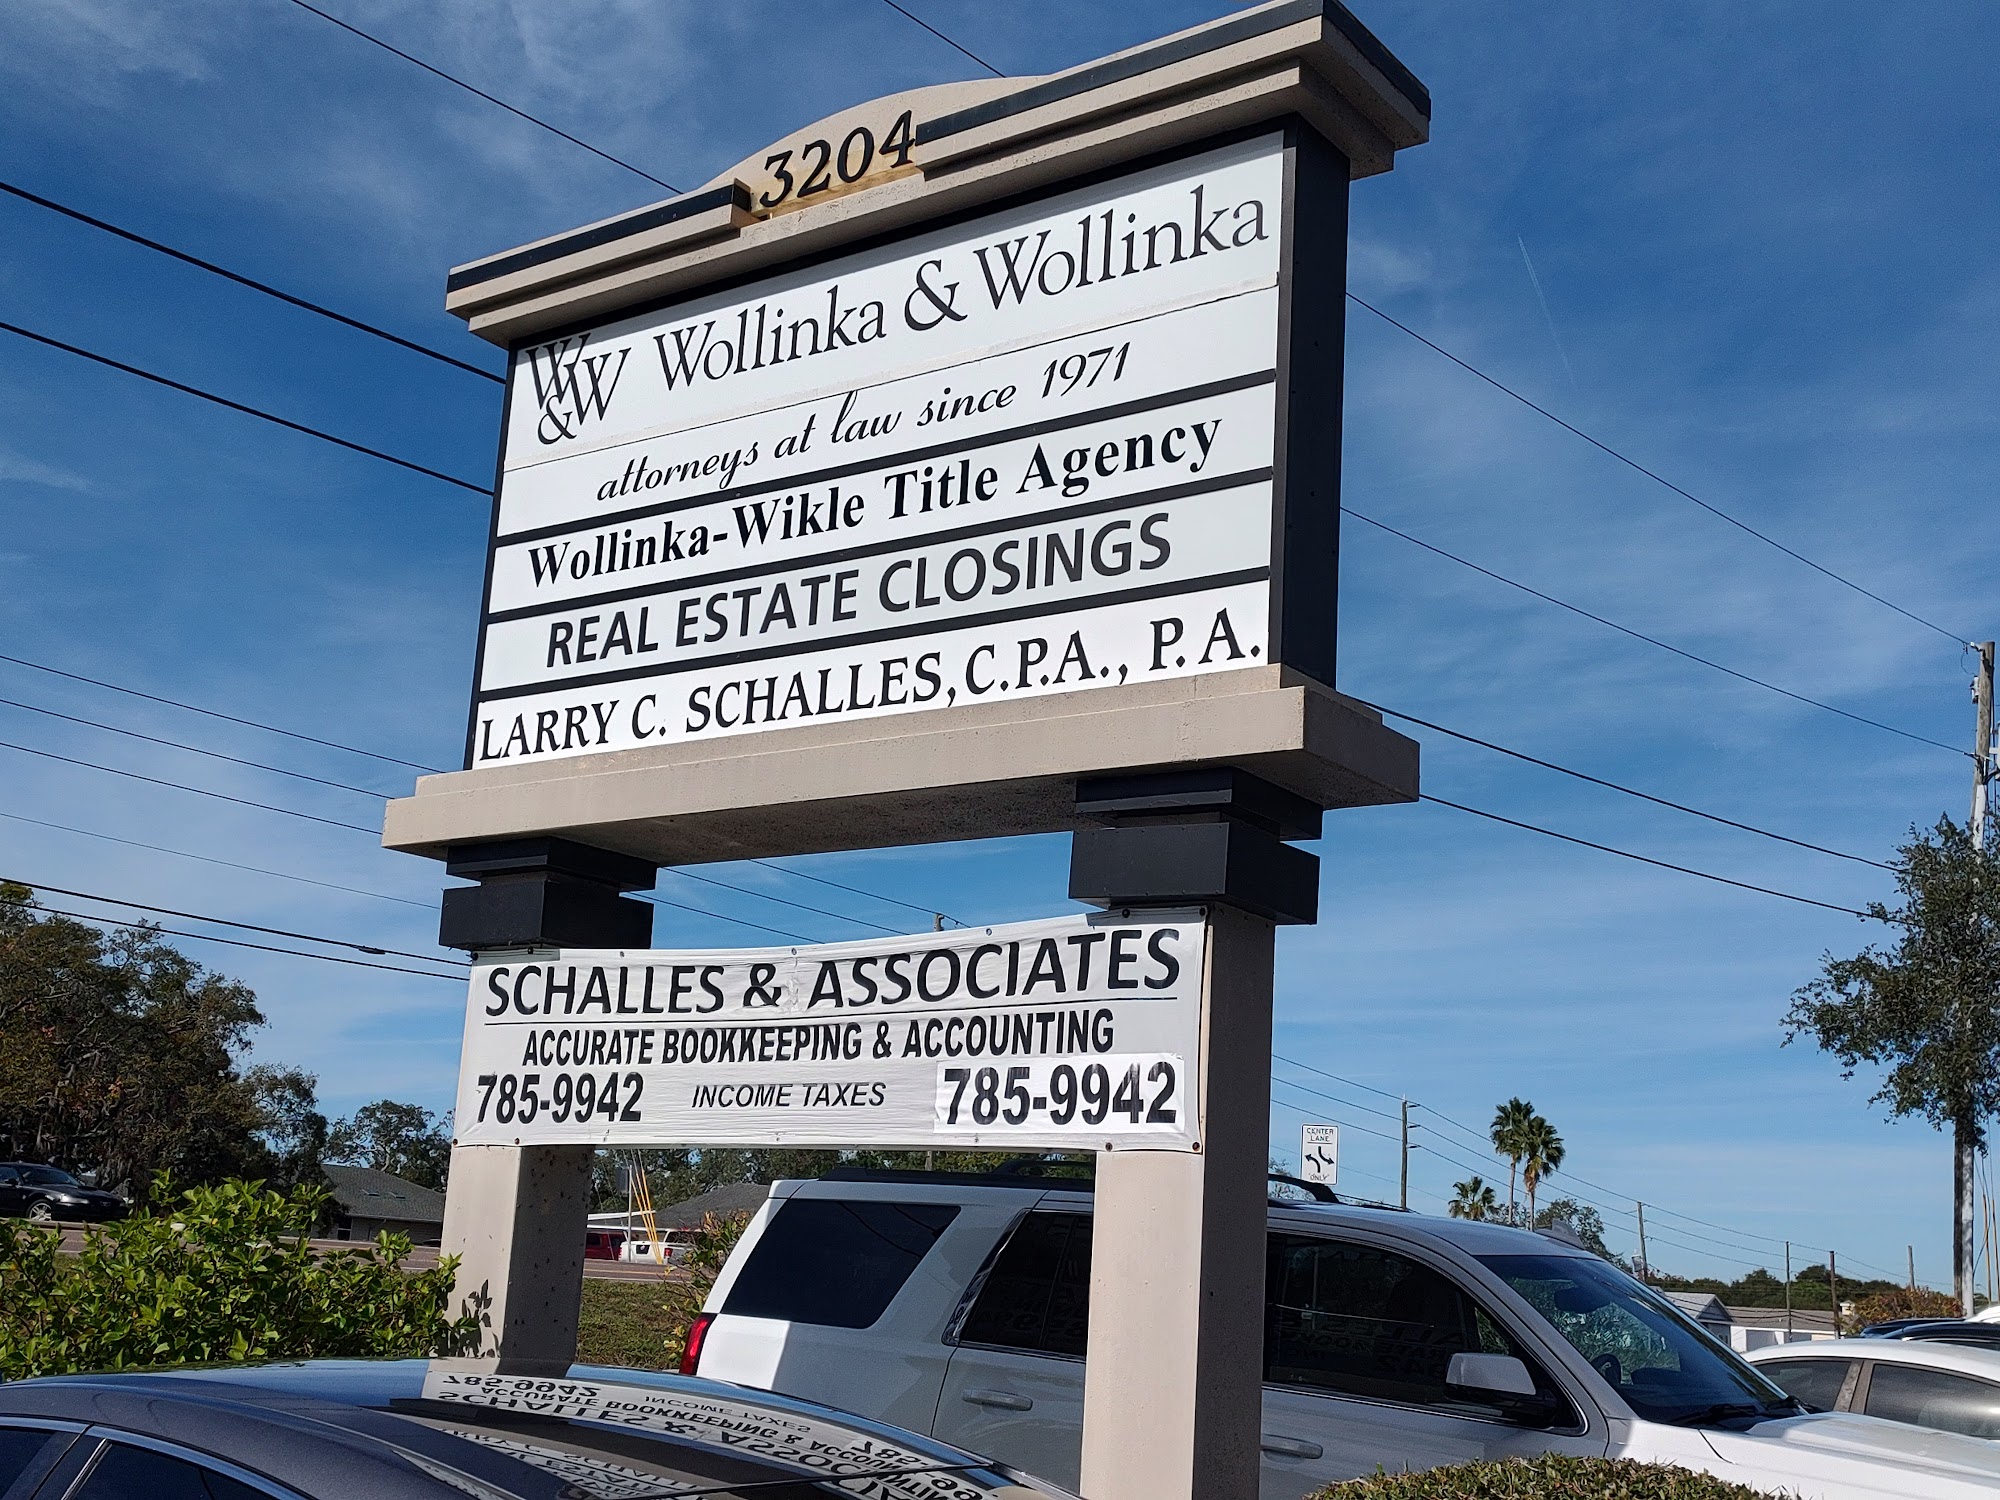 Accurate Bookkeeping & Accounting Schalles & Associates Certified Public Accountant